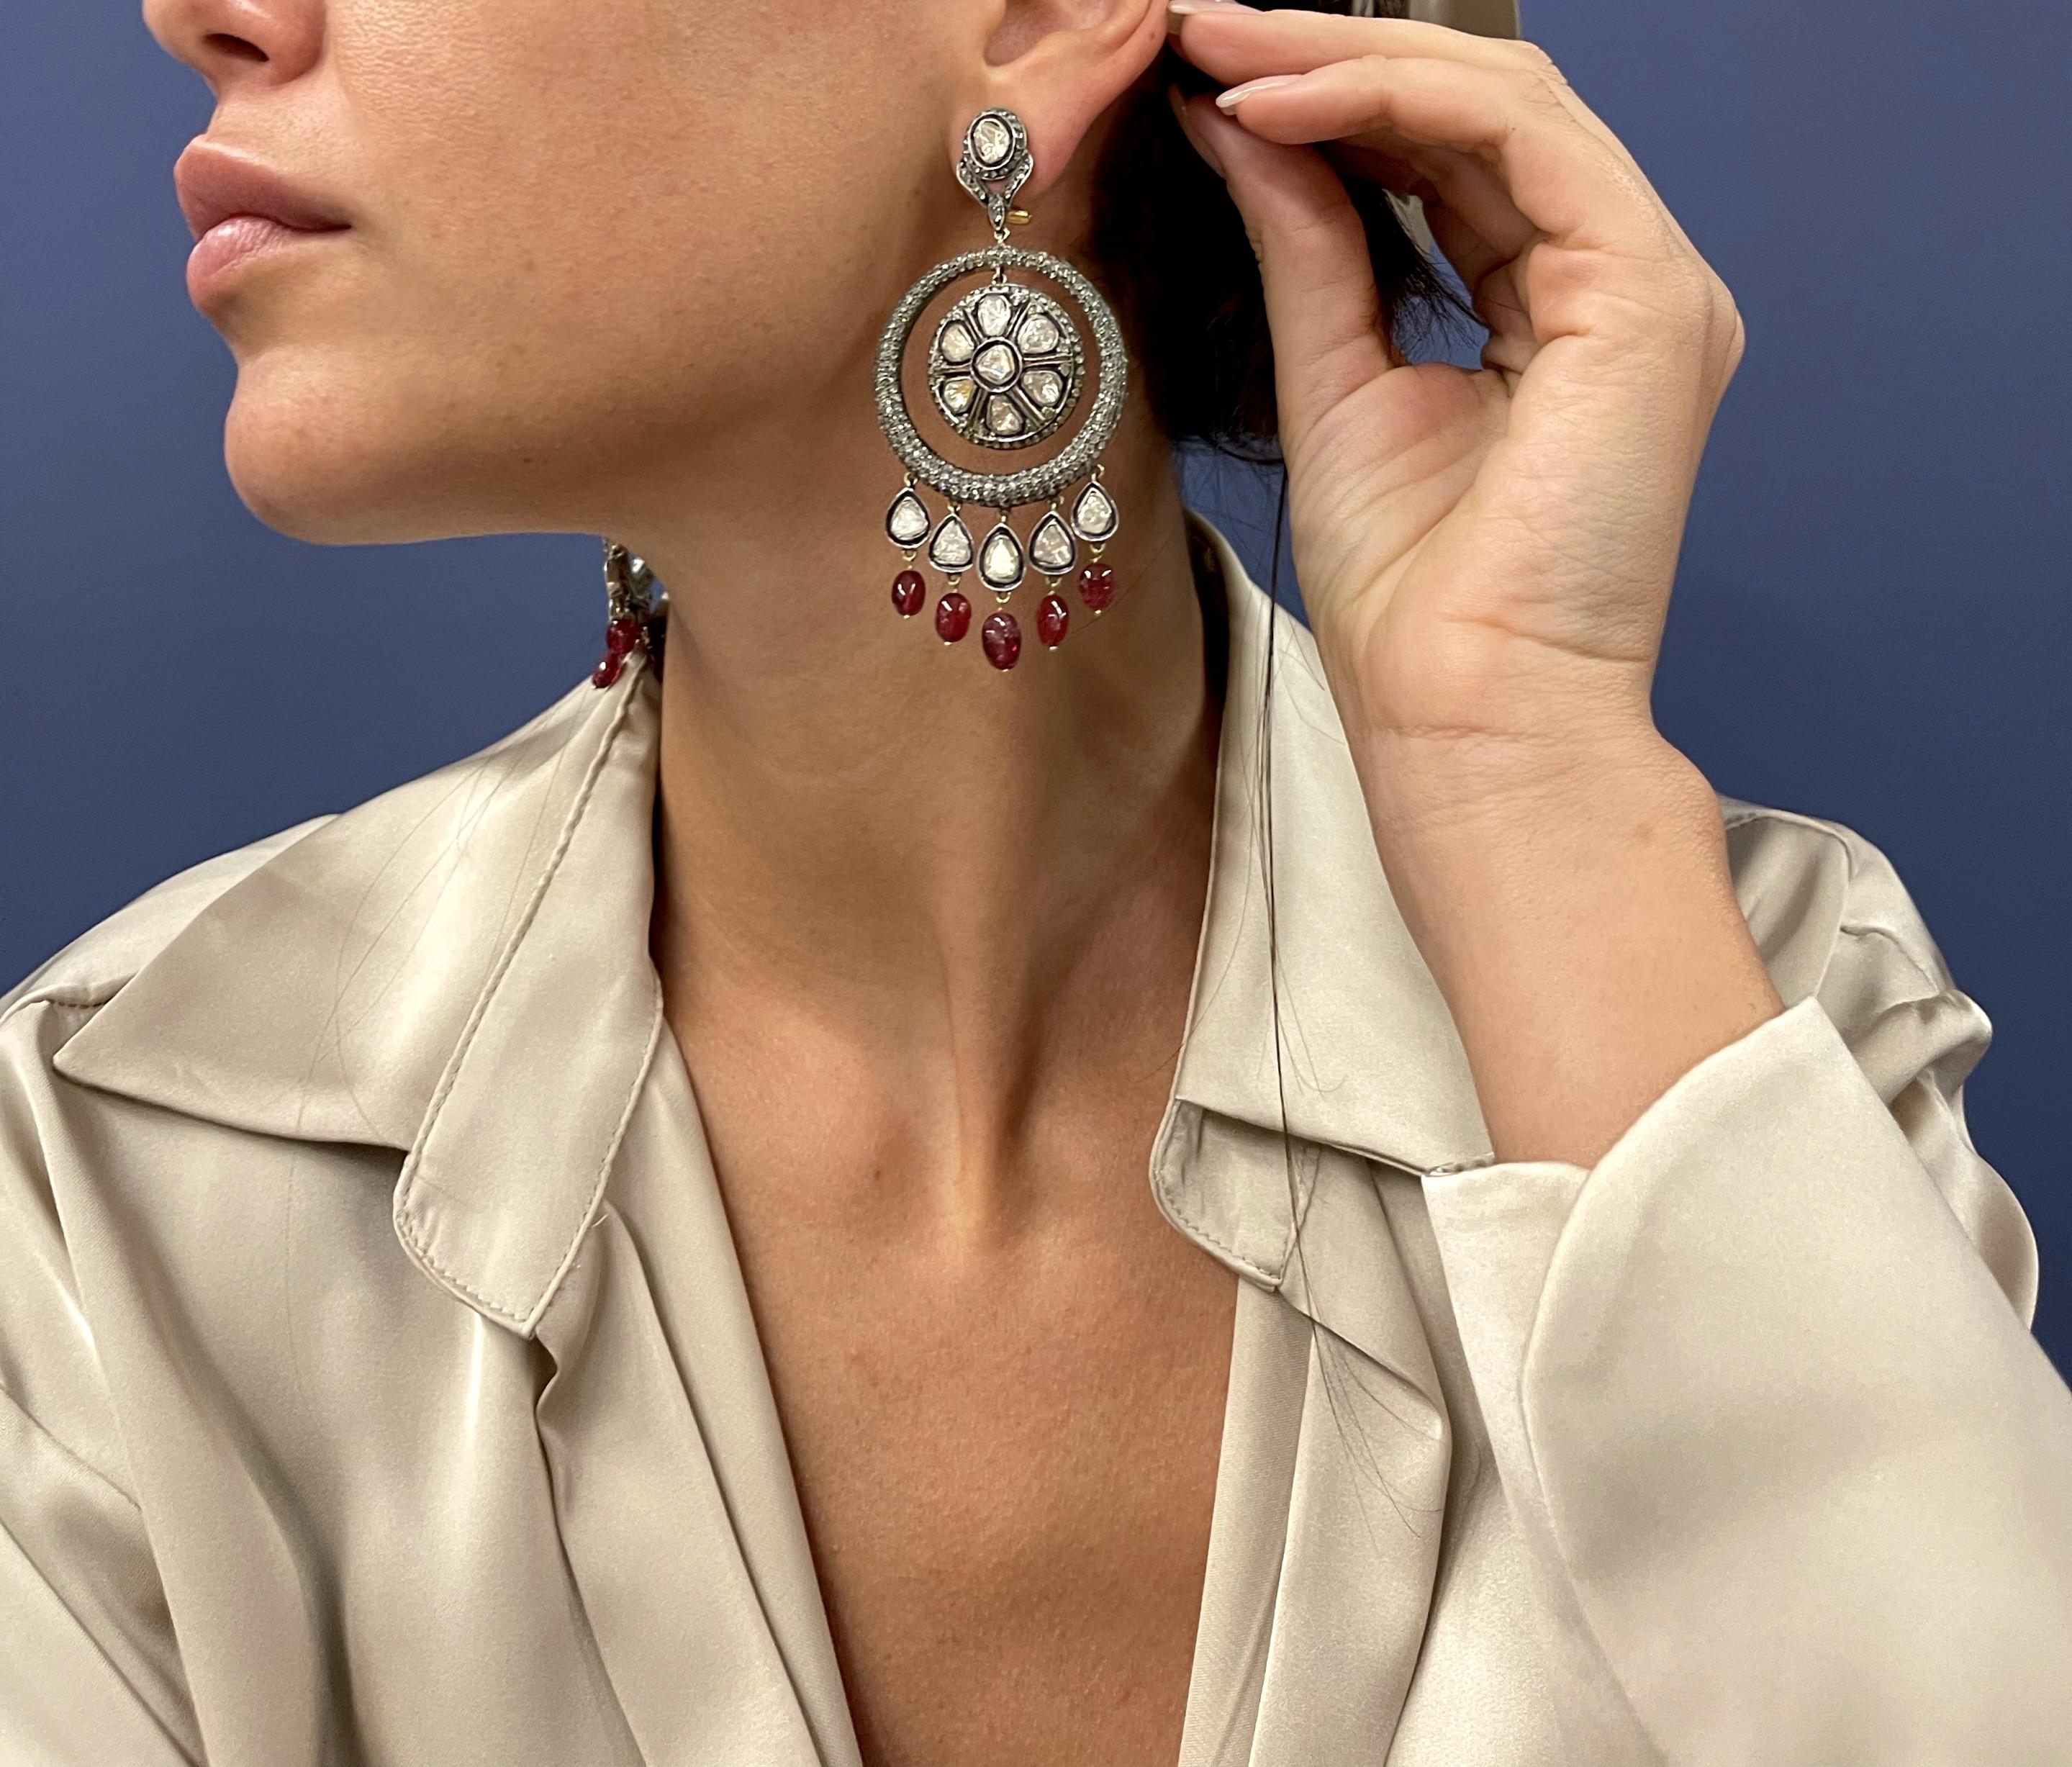 Brilliant, shining and stunning large chandelier earrings made in silver and gold, embellished by rose and diamond cut diamonds and  red oval drop tourmalines. 
These earrings are eye catching very brilliant, unique they will elegantly sway as you